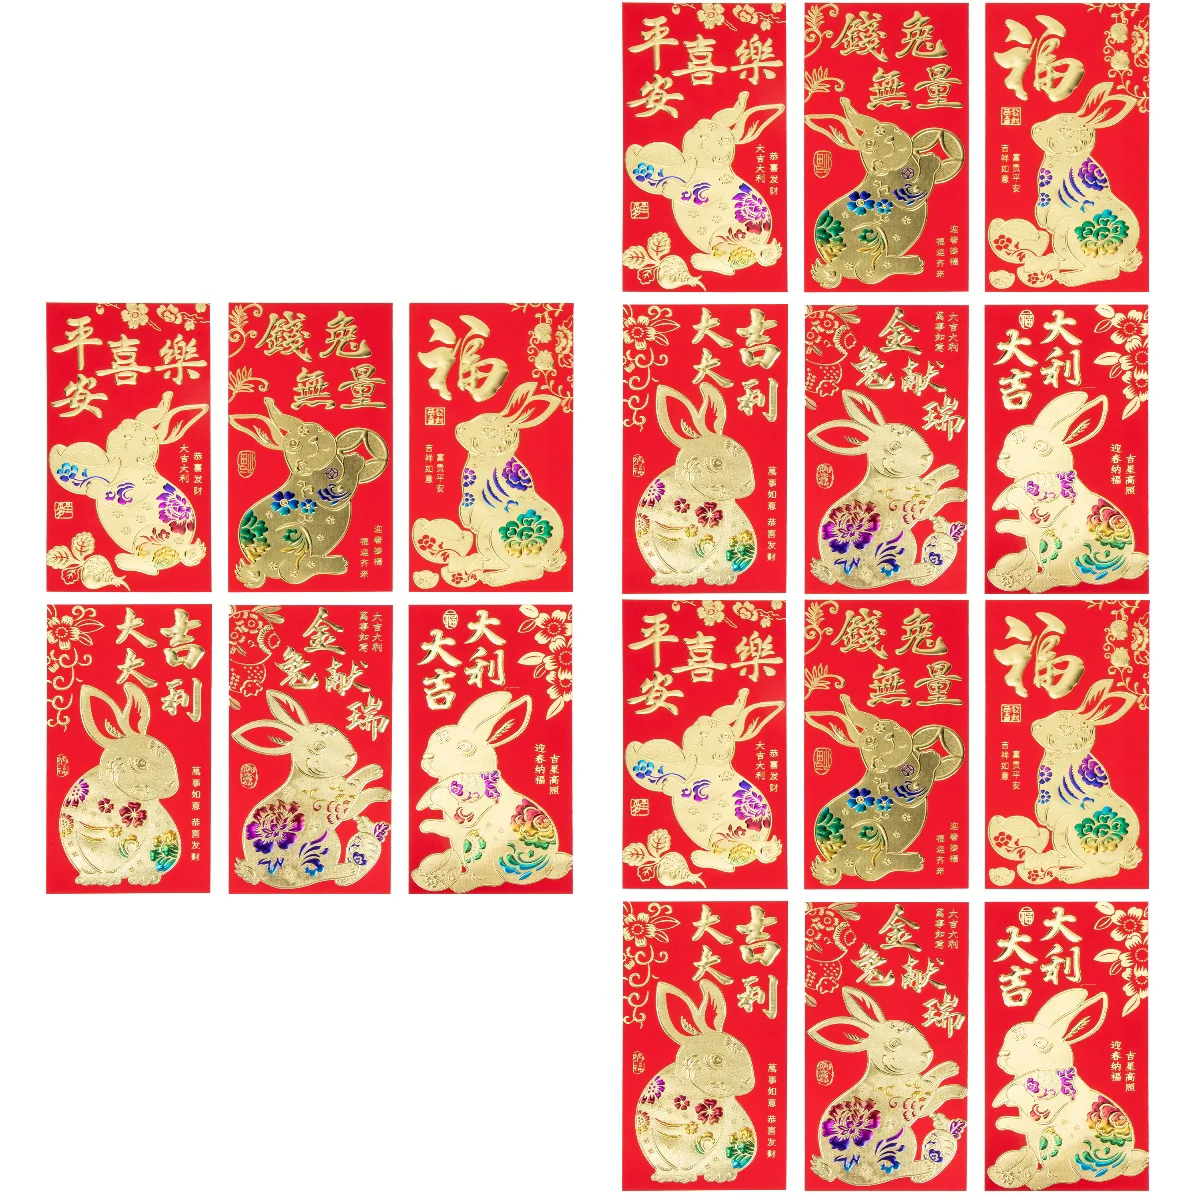 

Red Envelope Year New Chinese Hong Bao Lucky Packets Money Packet 2023 Envelopes Festival Spring Wedding See Lai Asian Lunar